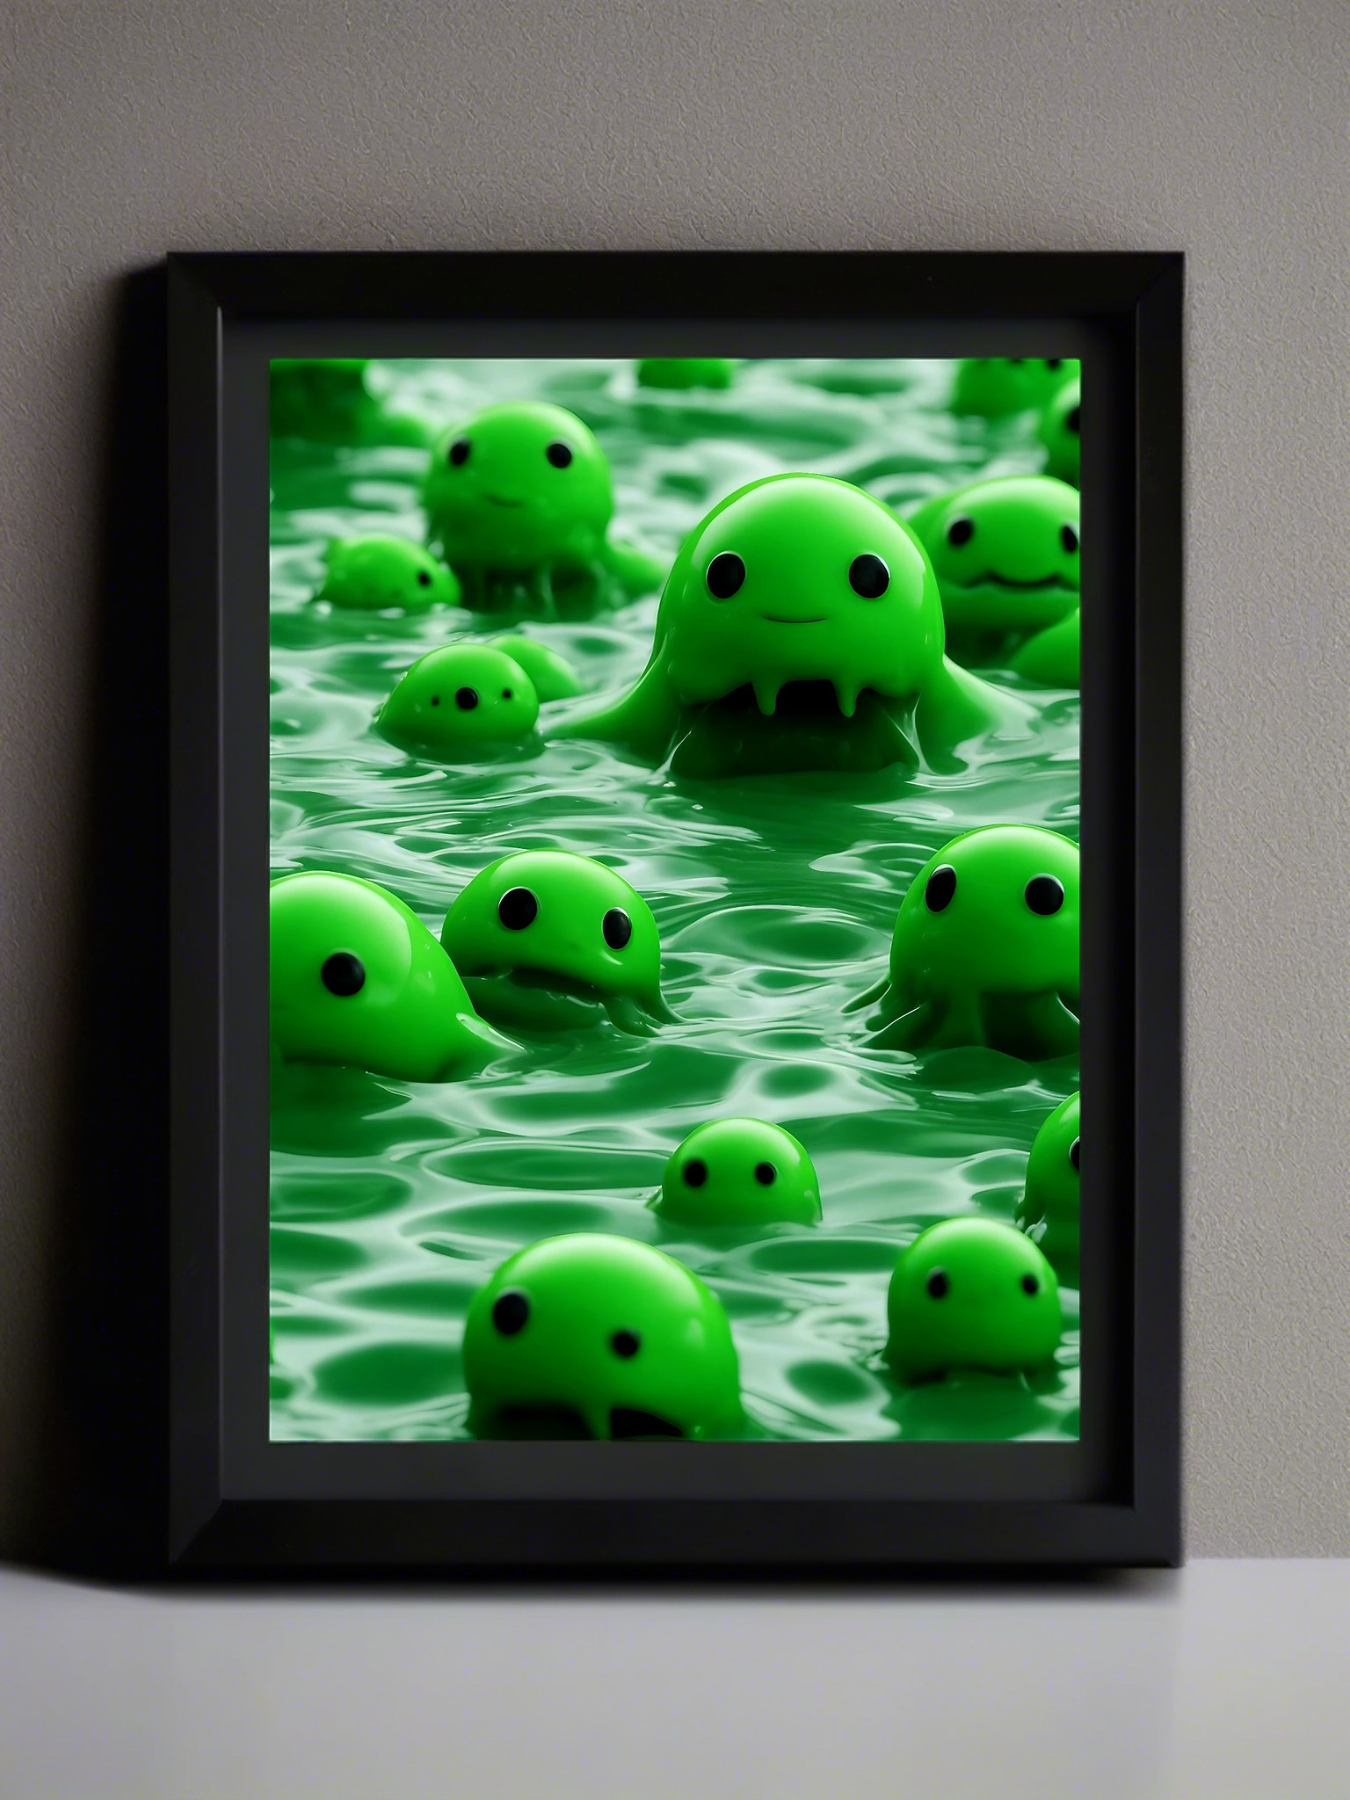 More cute green slime monsters in the lake - fantasy mini photo poster - 27x20 cm 3